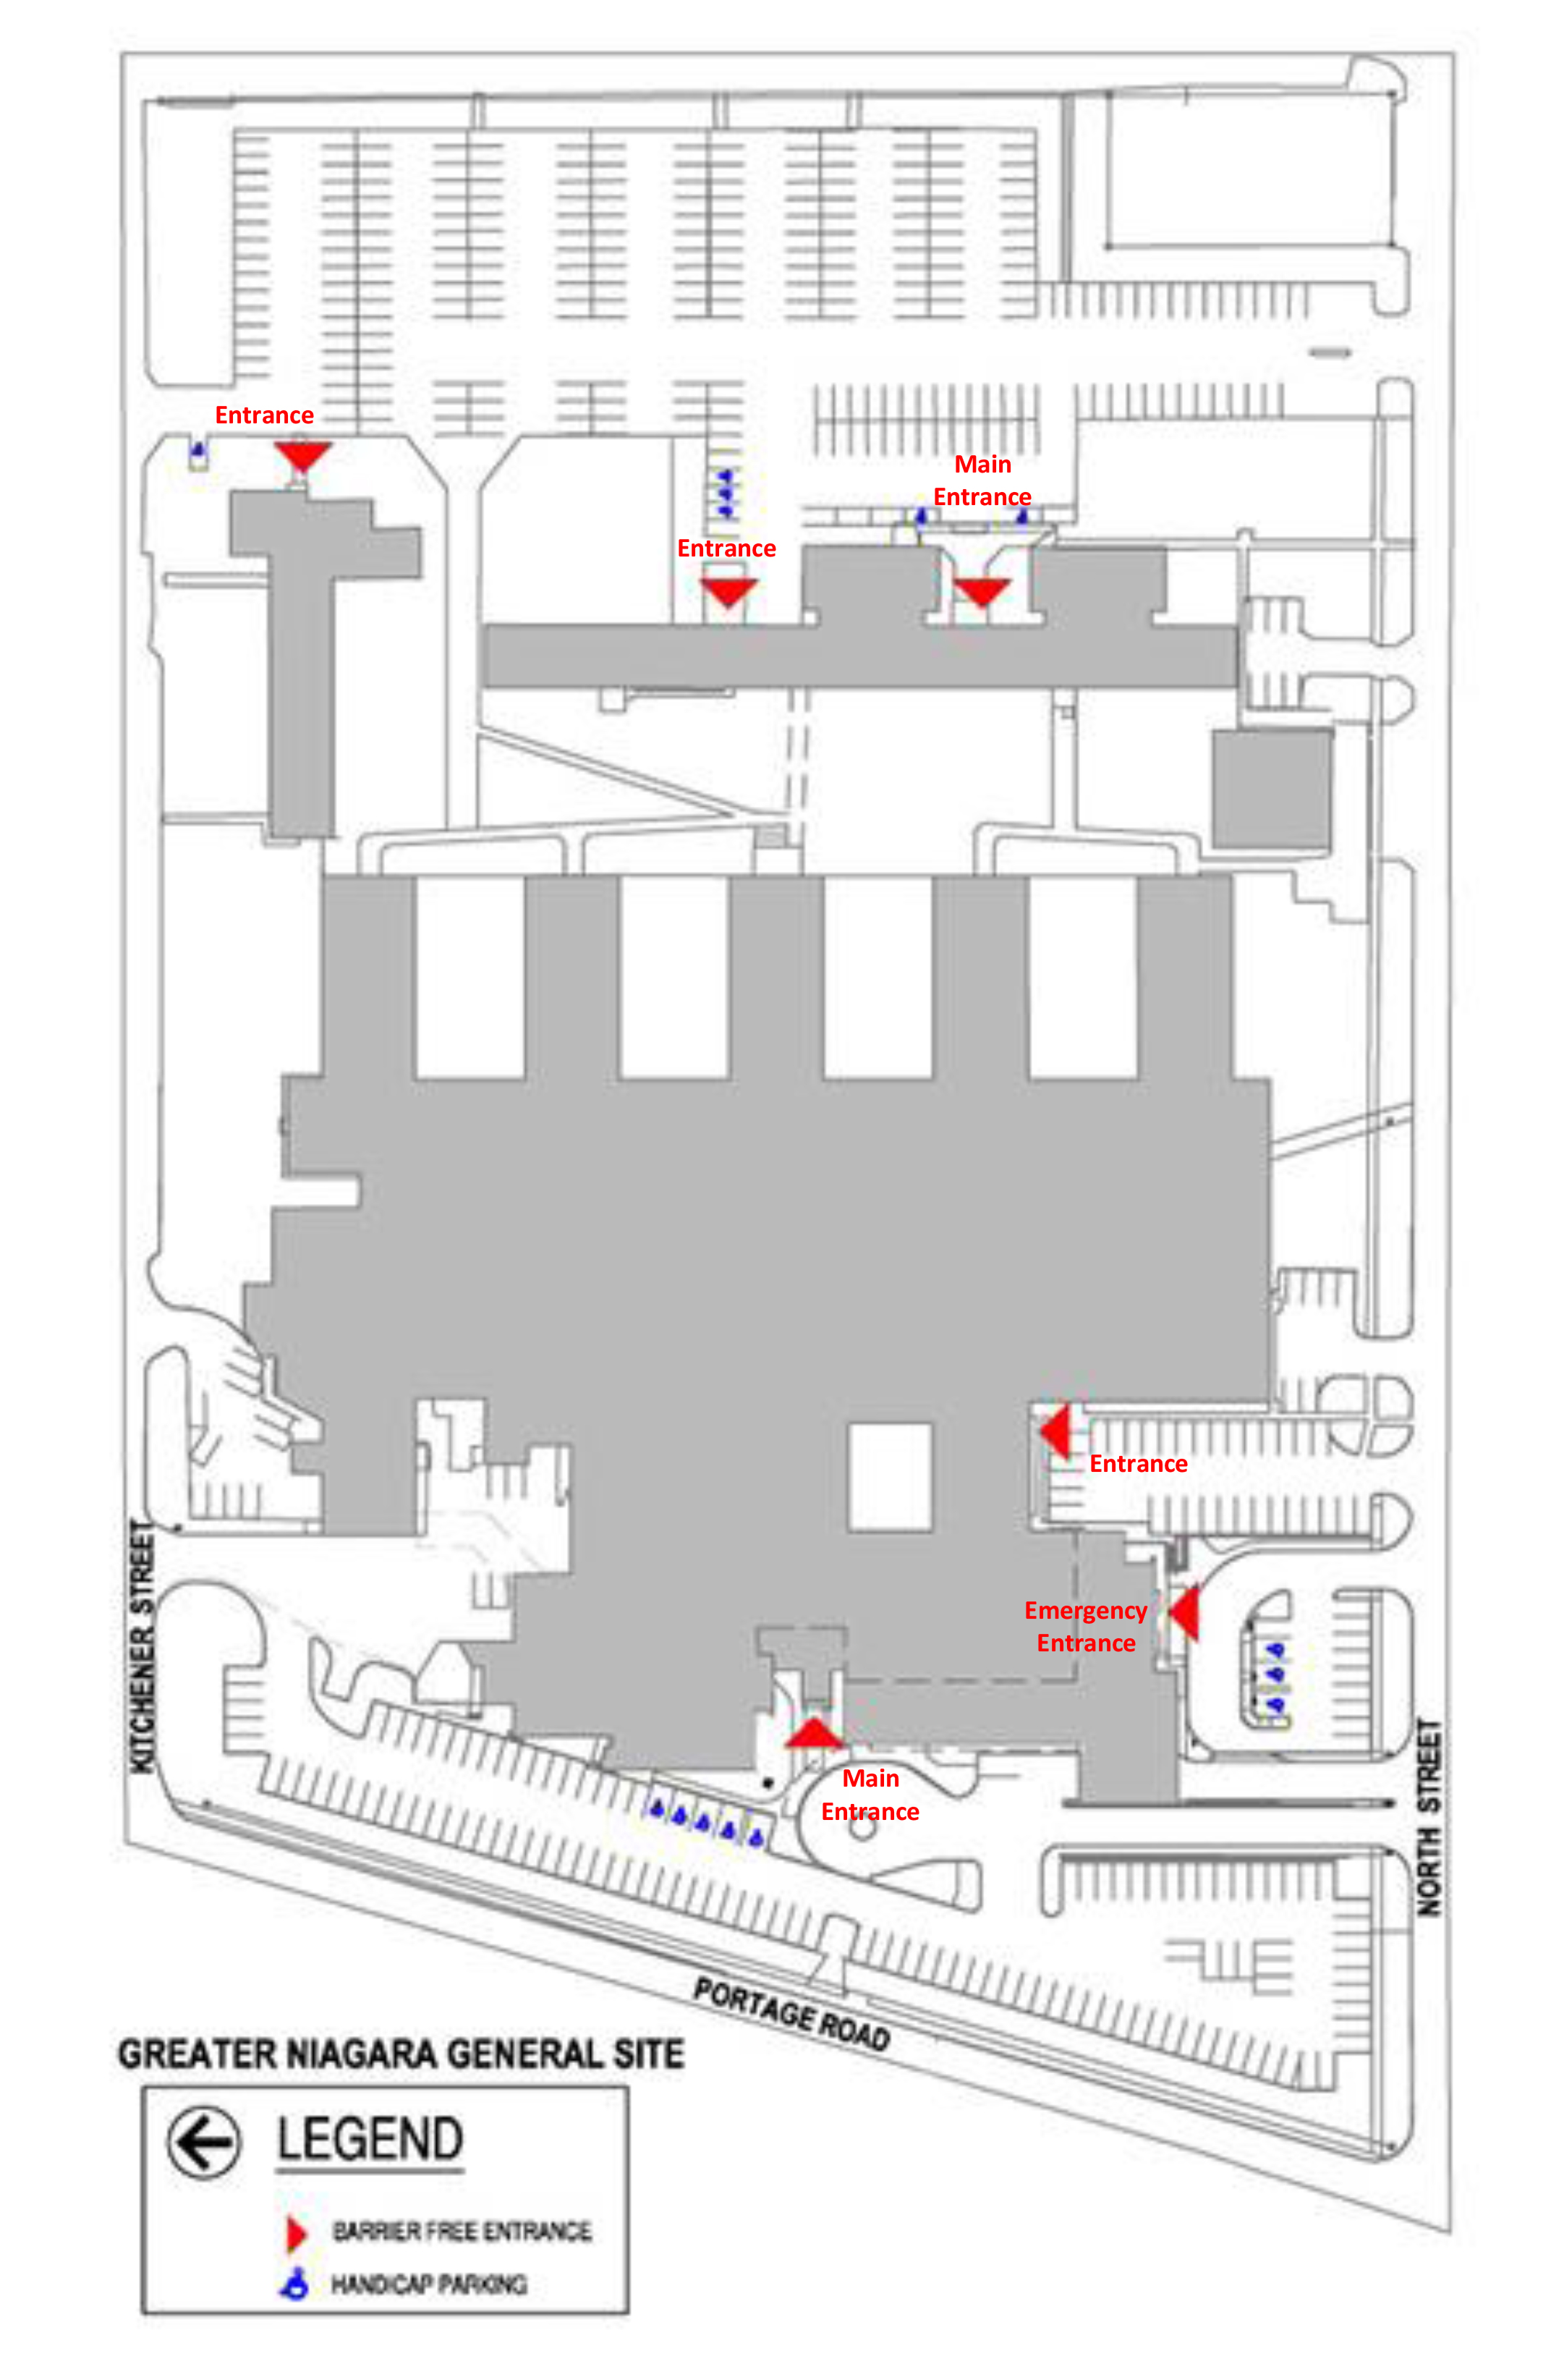 Greater Niagara General Entrance & Accessibility Information